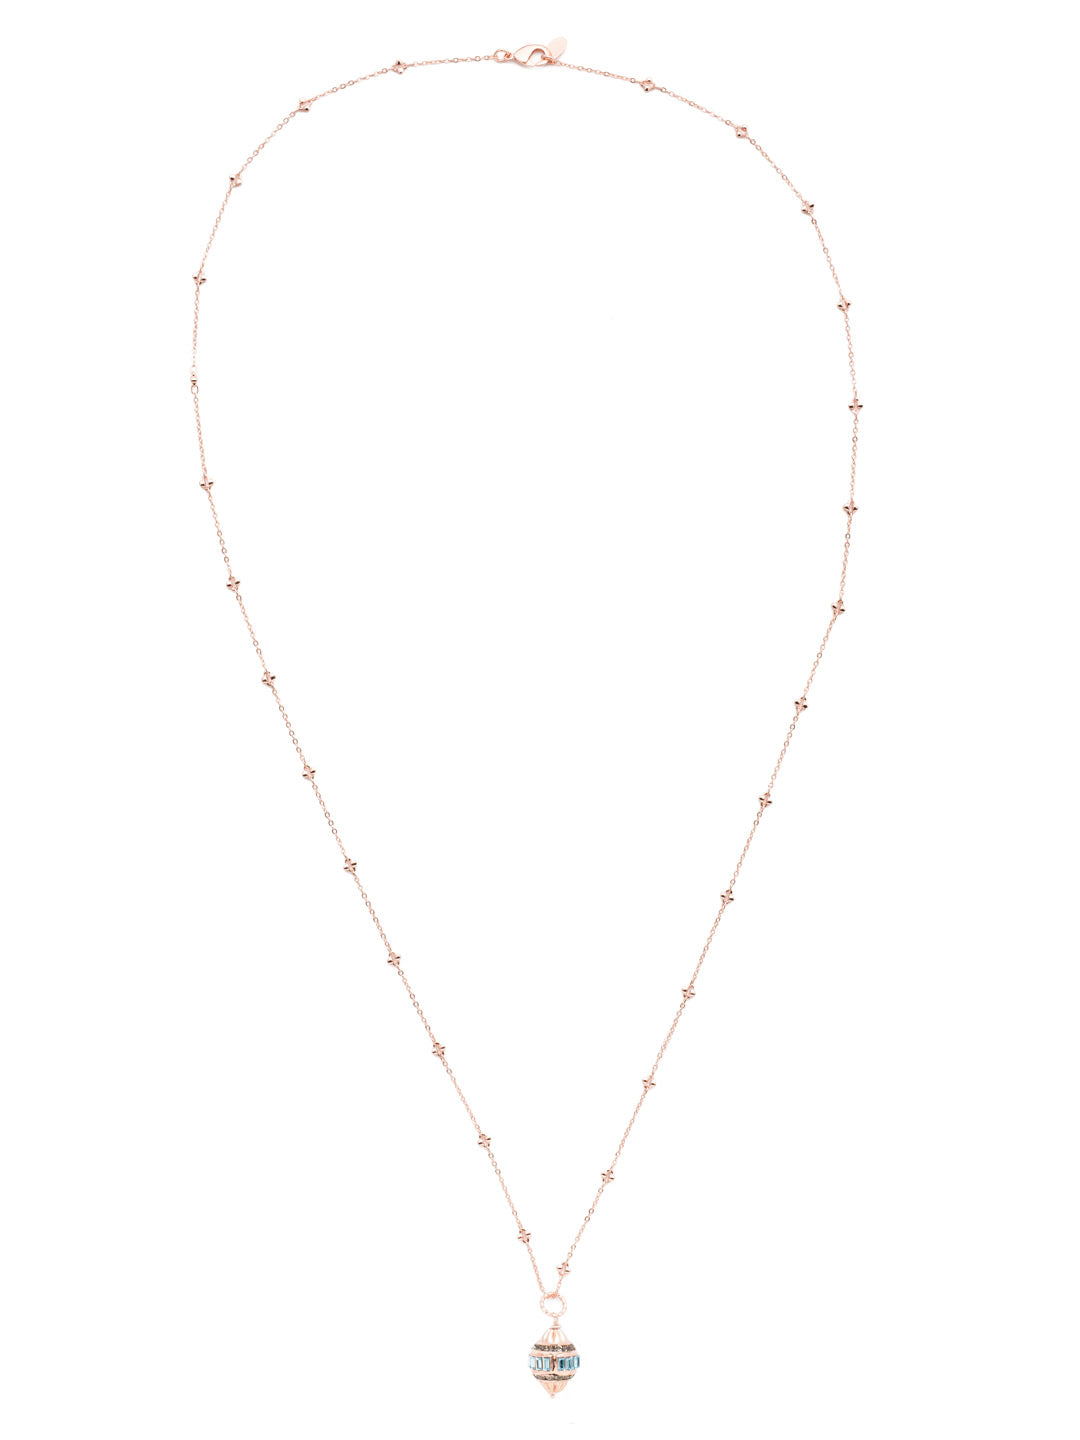 Lola Pendant Necklace - NEN14RGCAZ - The Lola Pendant Necklace dangles something completely unique and sparkly front and center, accented by smaller gems on a delicate chain. Make it the special standout piece in your jewelry collection. From Sorrelli's Crystal Azure collection in our Rose Gold-tone finish.